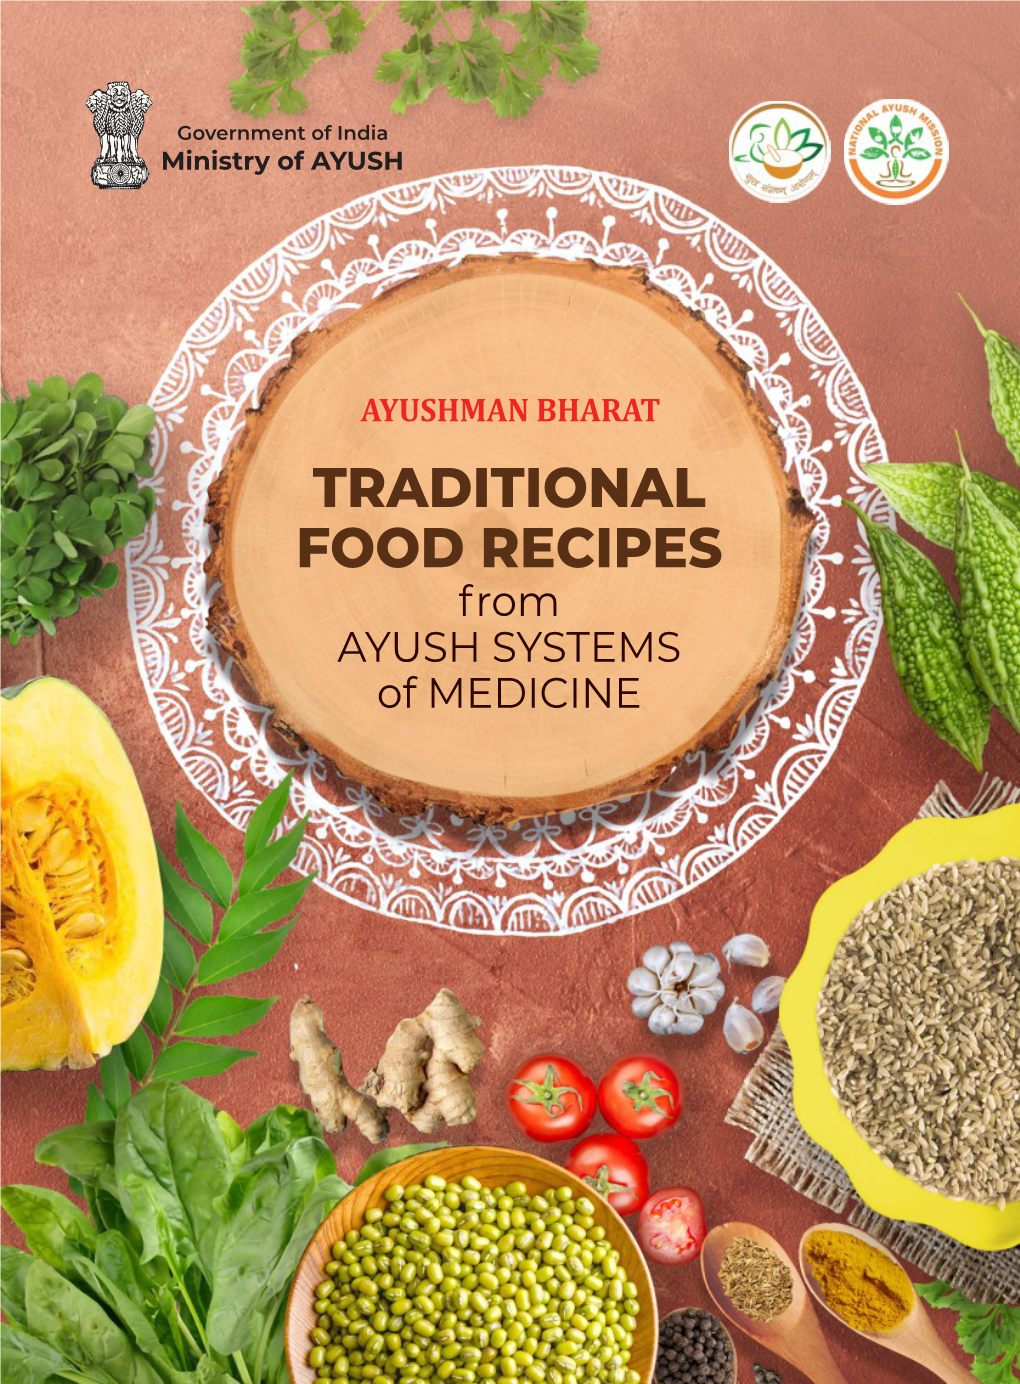 AYUSHMAN BHARAT TRADITIONAL FOOD RECIPES from AYUSH SYSTEMS of MEDICINE Design: Kamleshwar Singh Batra 9810316649 Tak an C All Disclaim Ont Y En Possible Inadv Ents